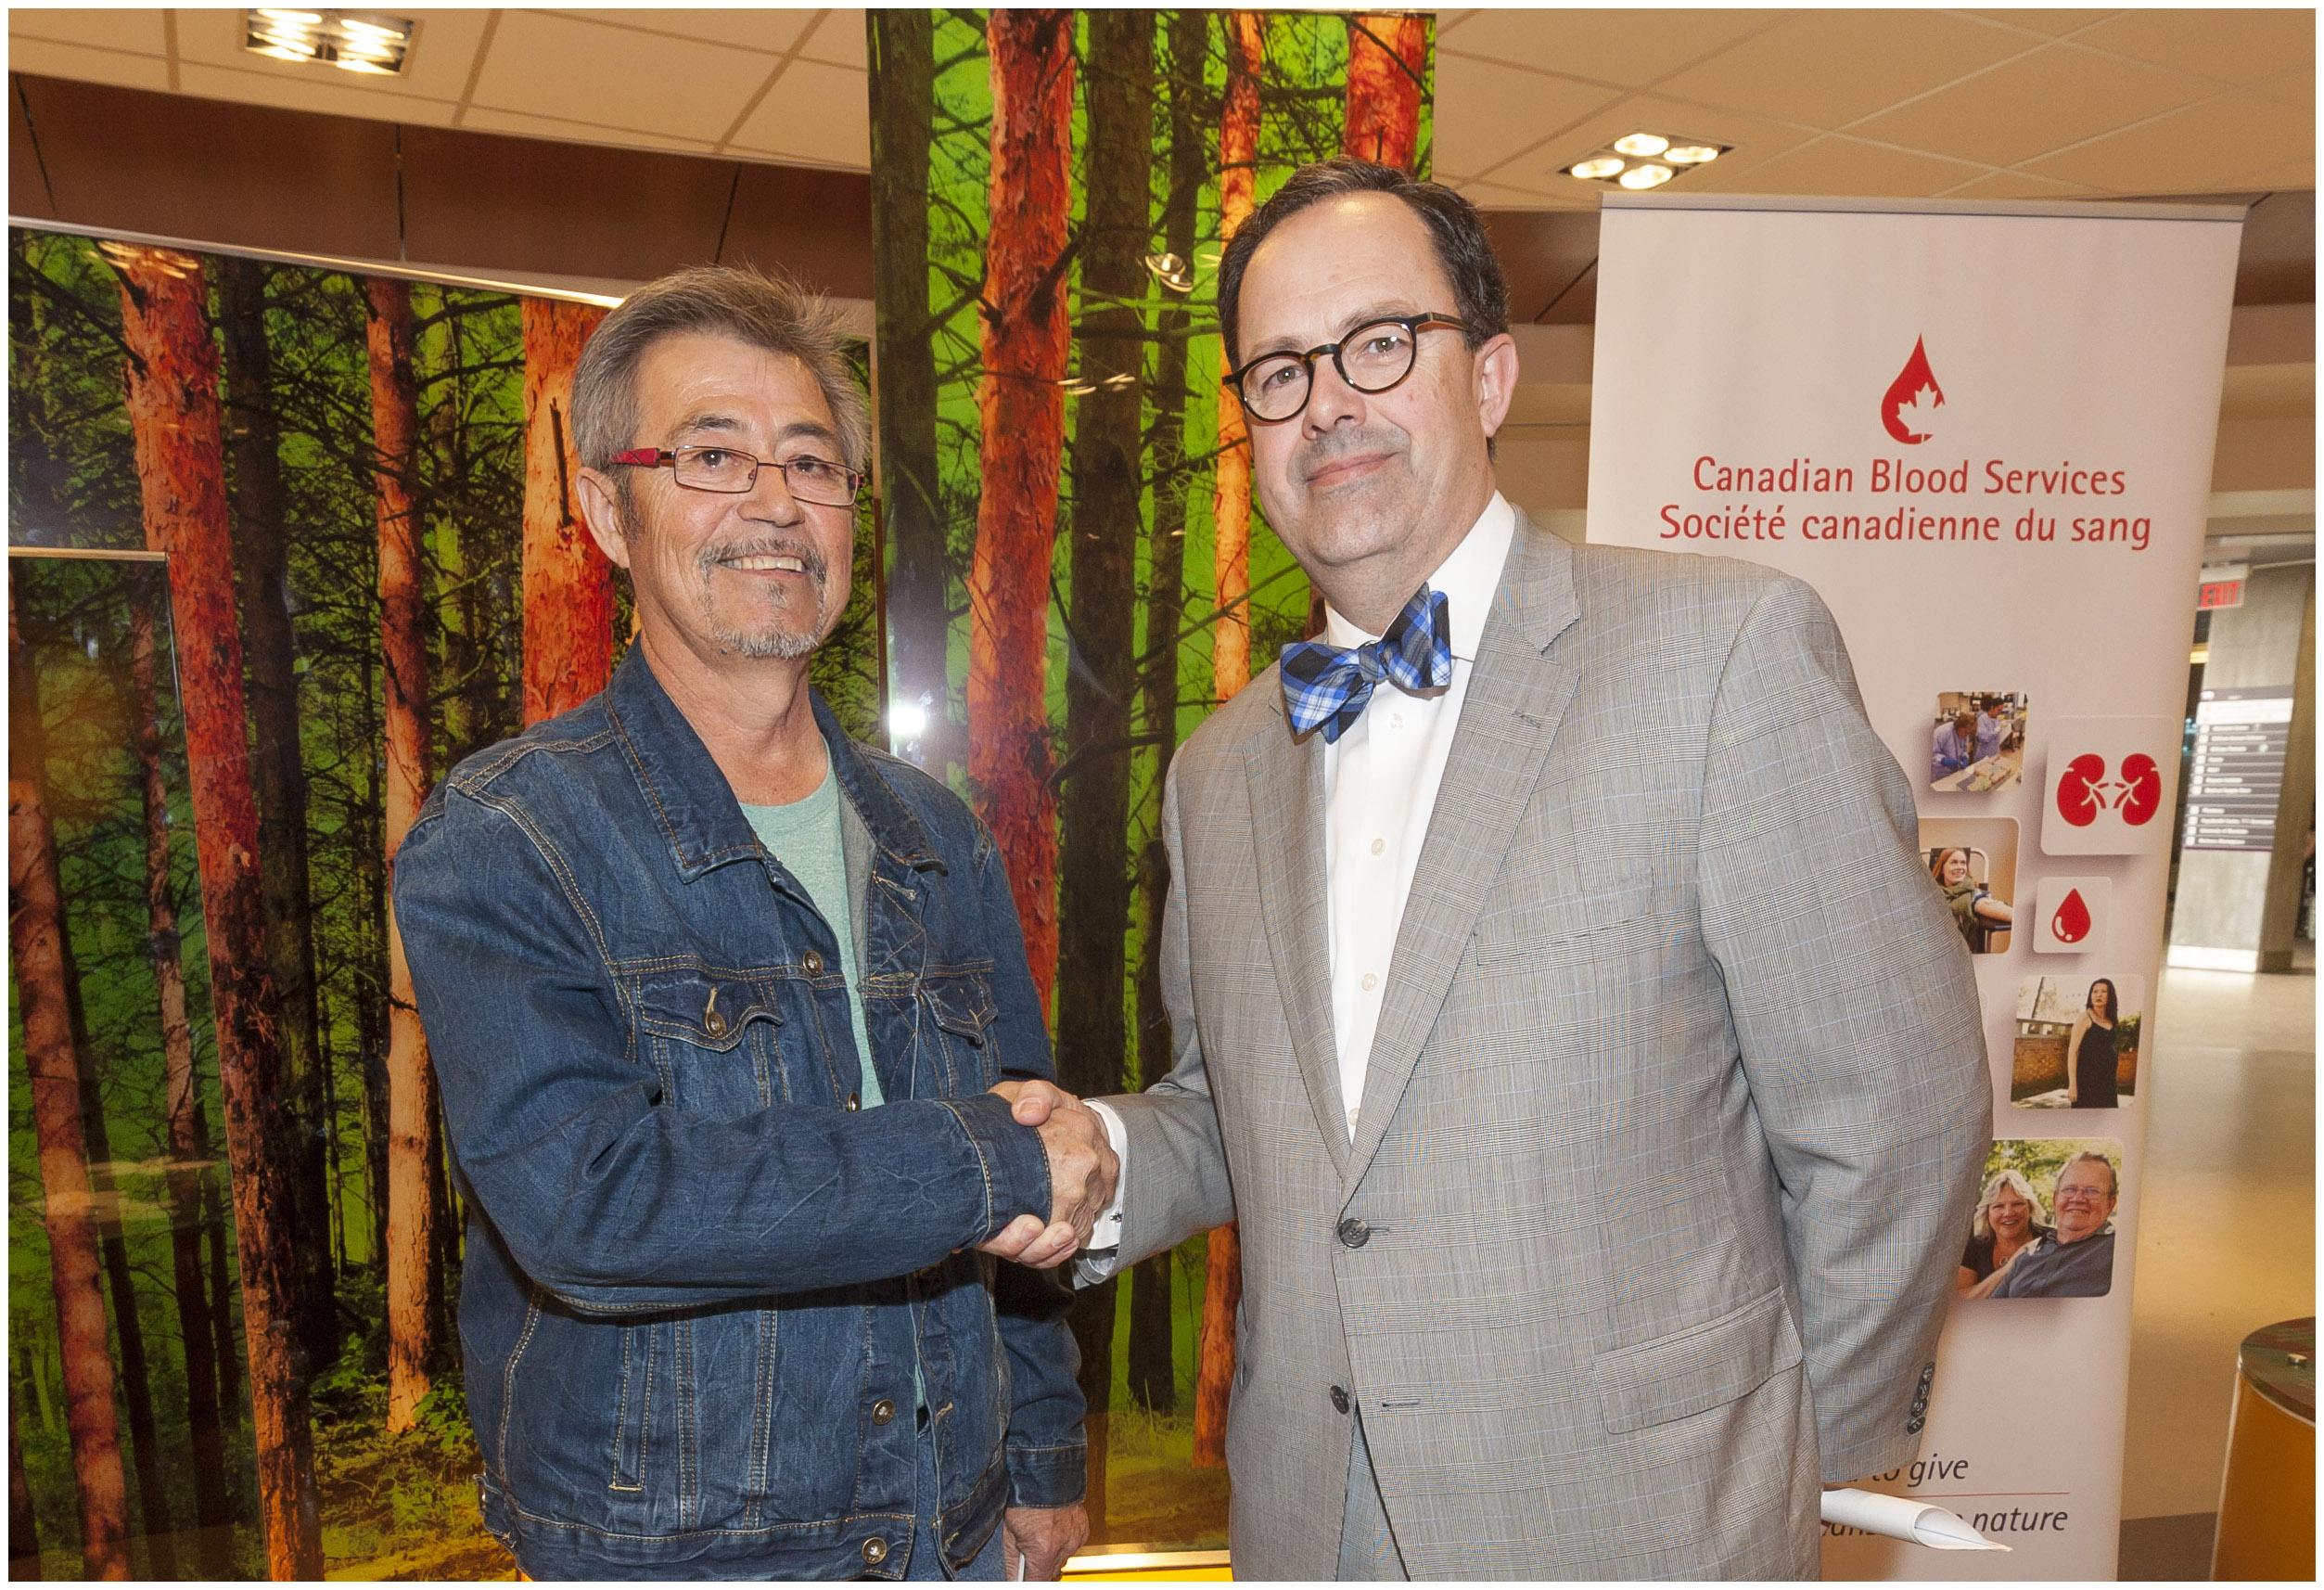 Arnold Dysart (left) pictured with Dr. Peter Nickerson (right), Medical Advisor, Organ Donation and Transplantation Division, Canadian Blood Services. Arnold received his kidney in 2014